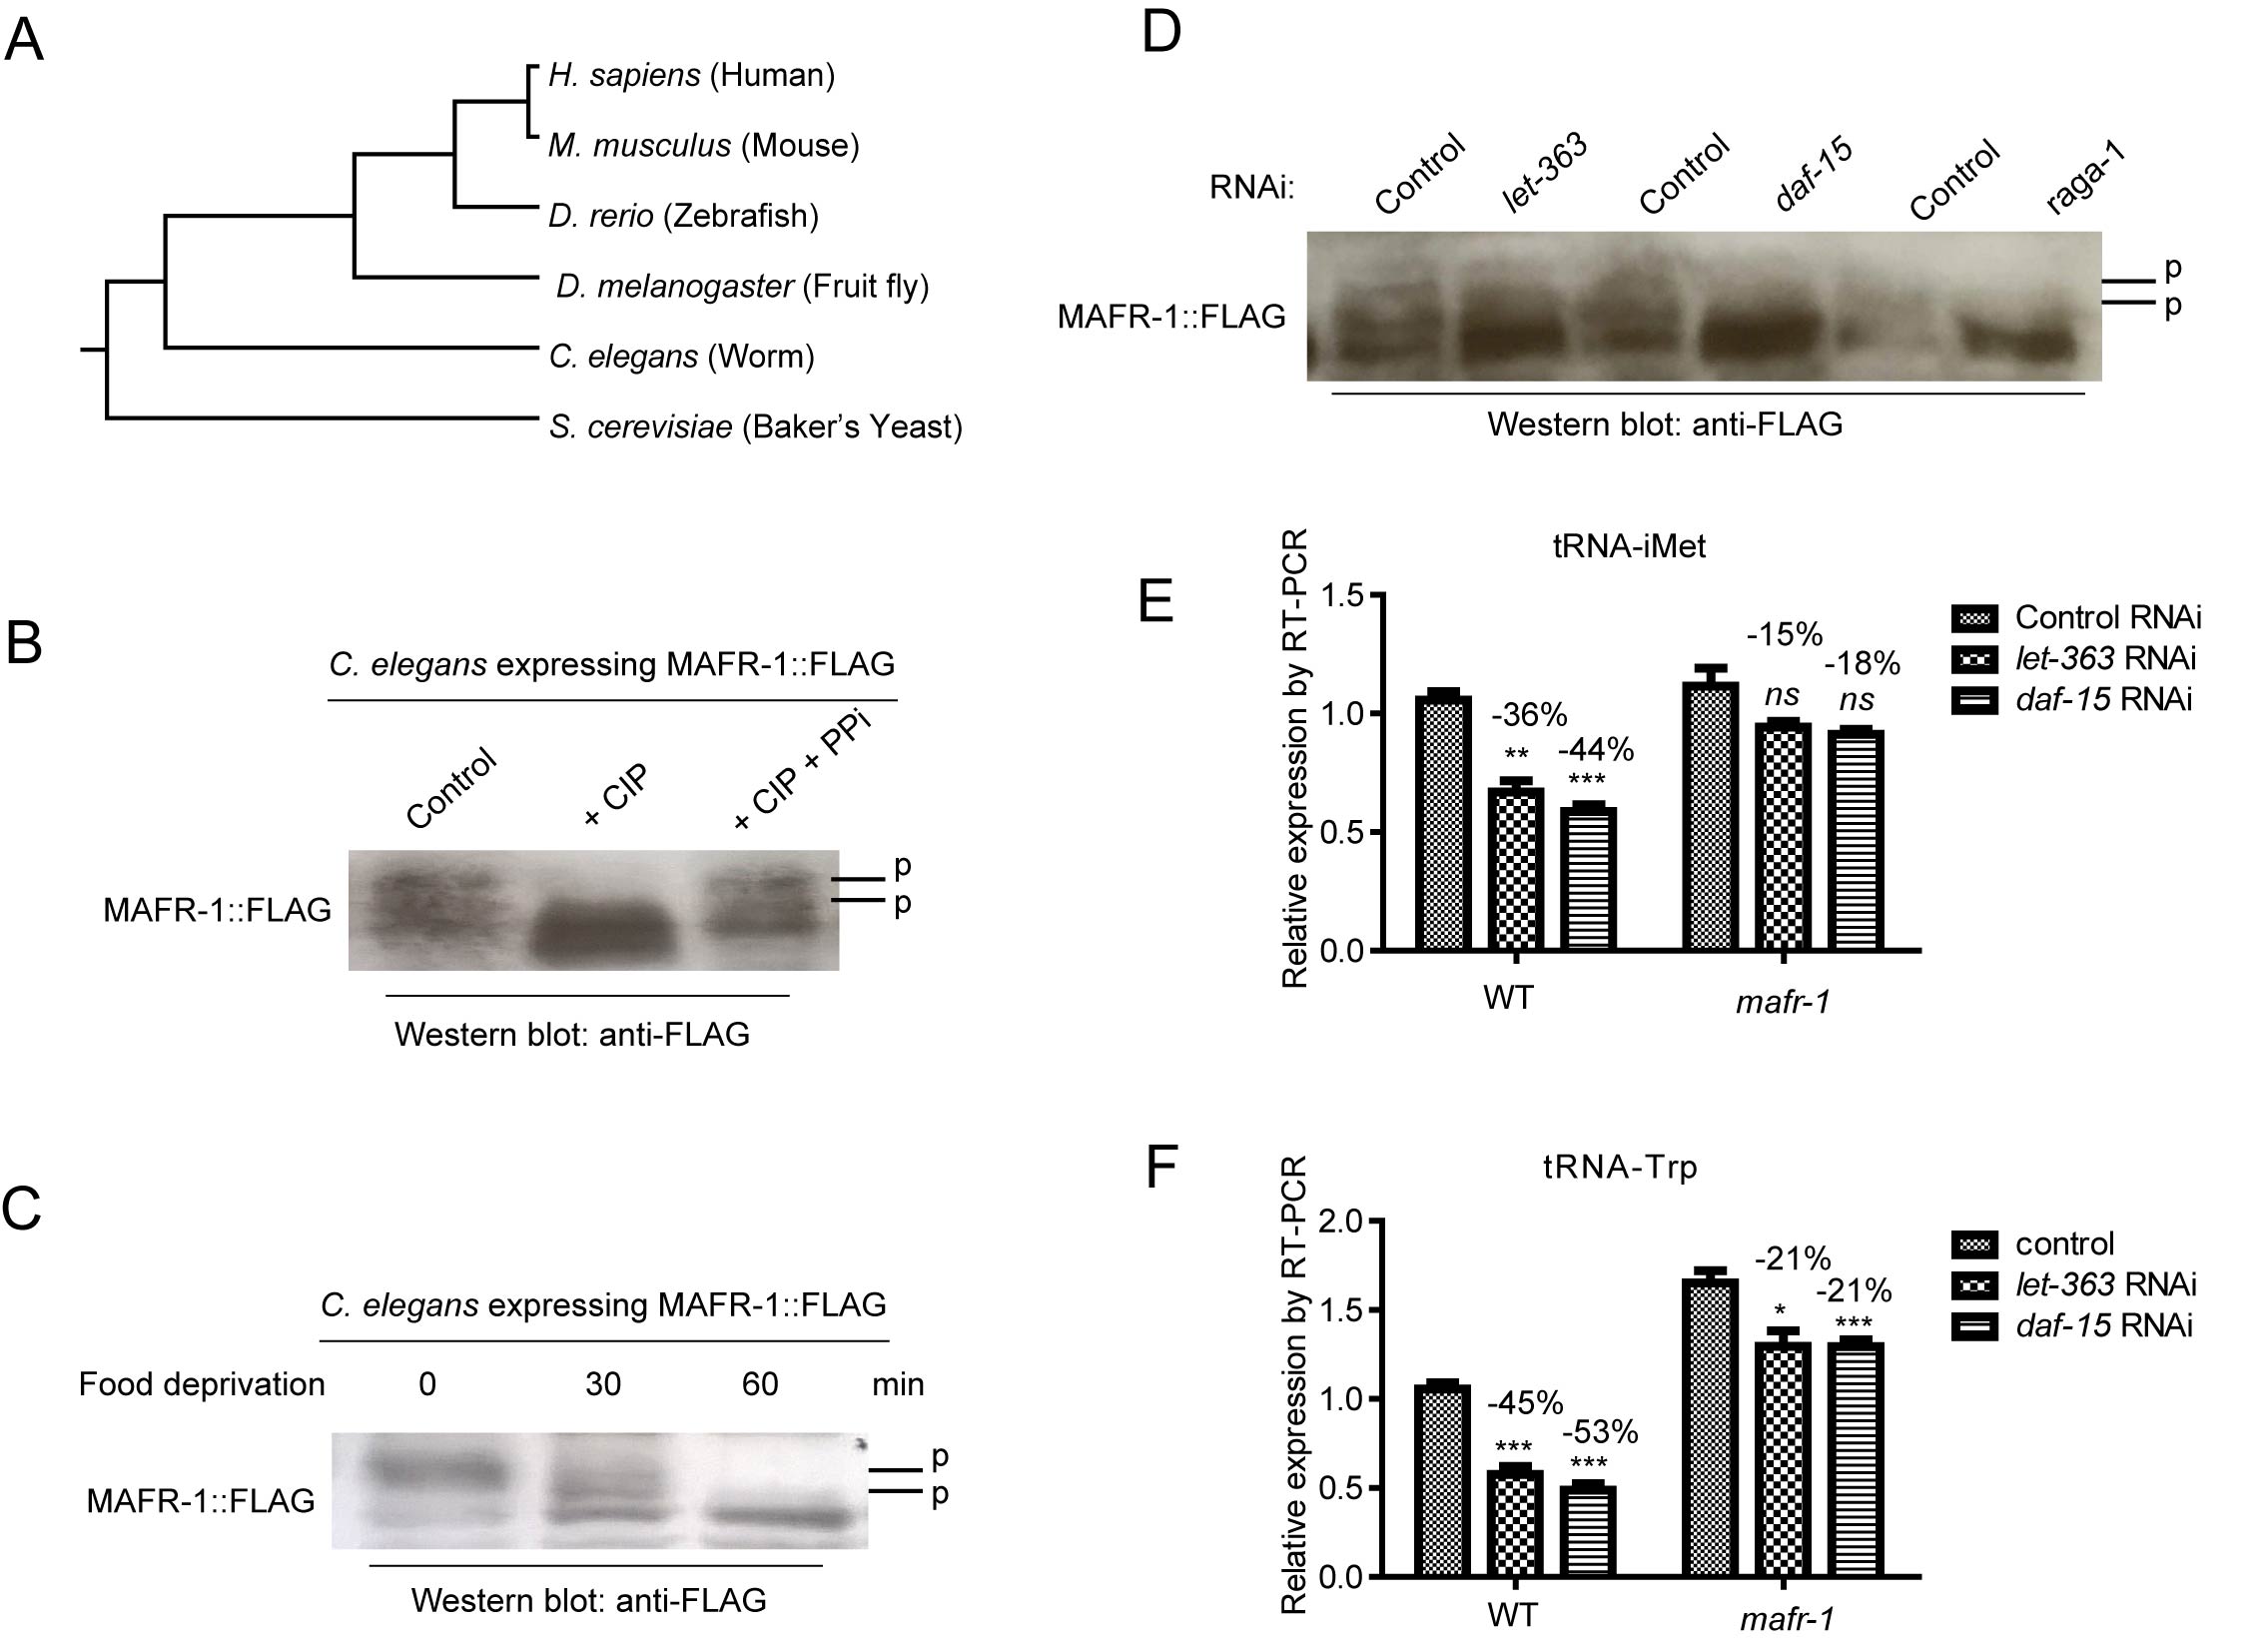 MAFR-1 is conserved and regulated similarly by mTOR pathway.